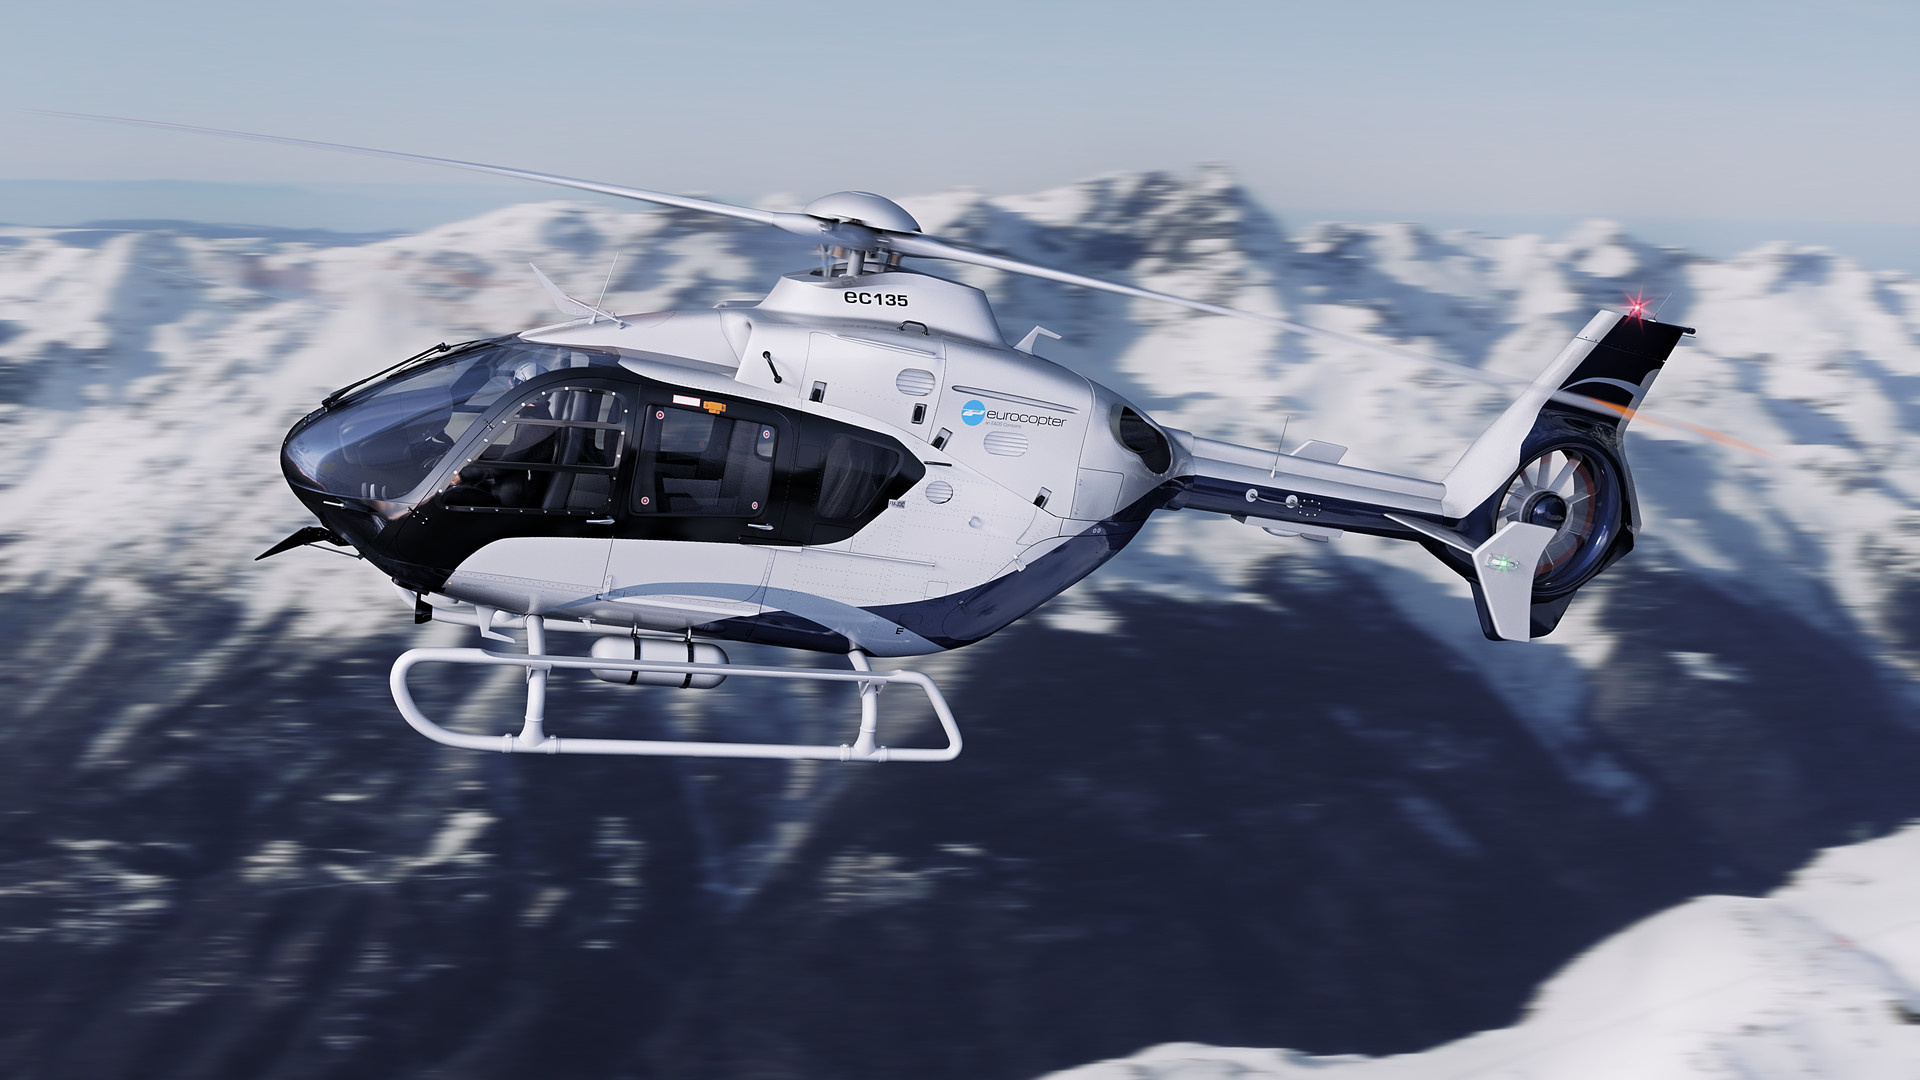 Eurocopter travels, Eurocopter art, Air helicopter, 1920x1080 Full HD Desktop